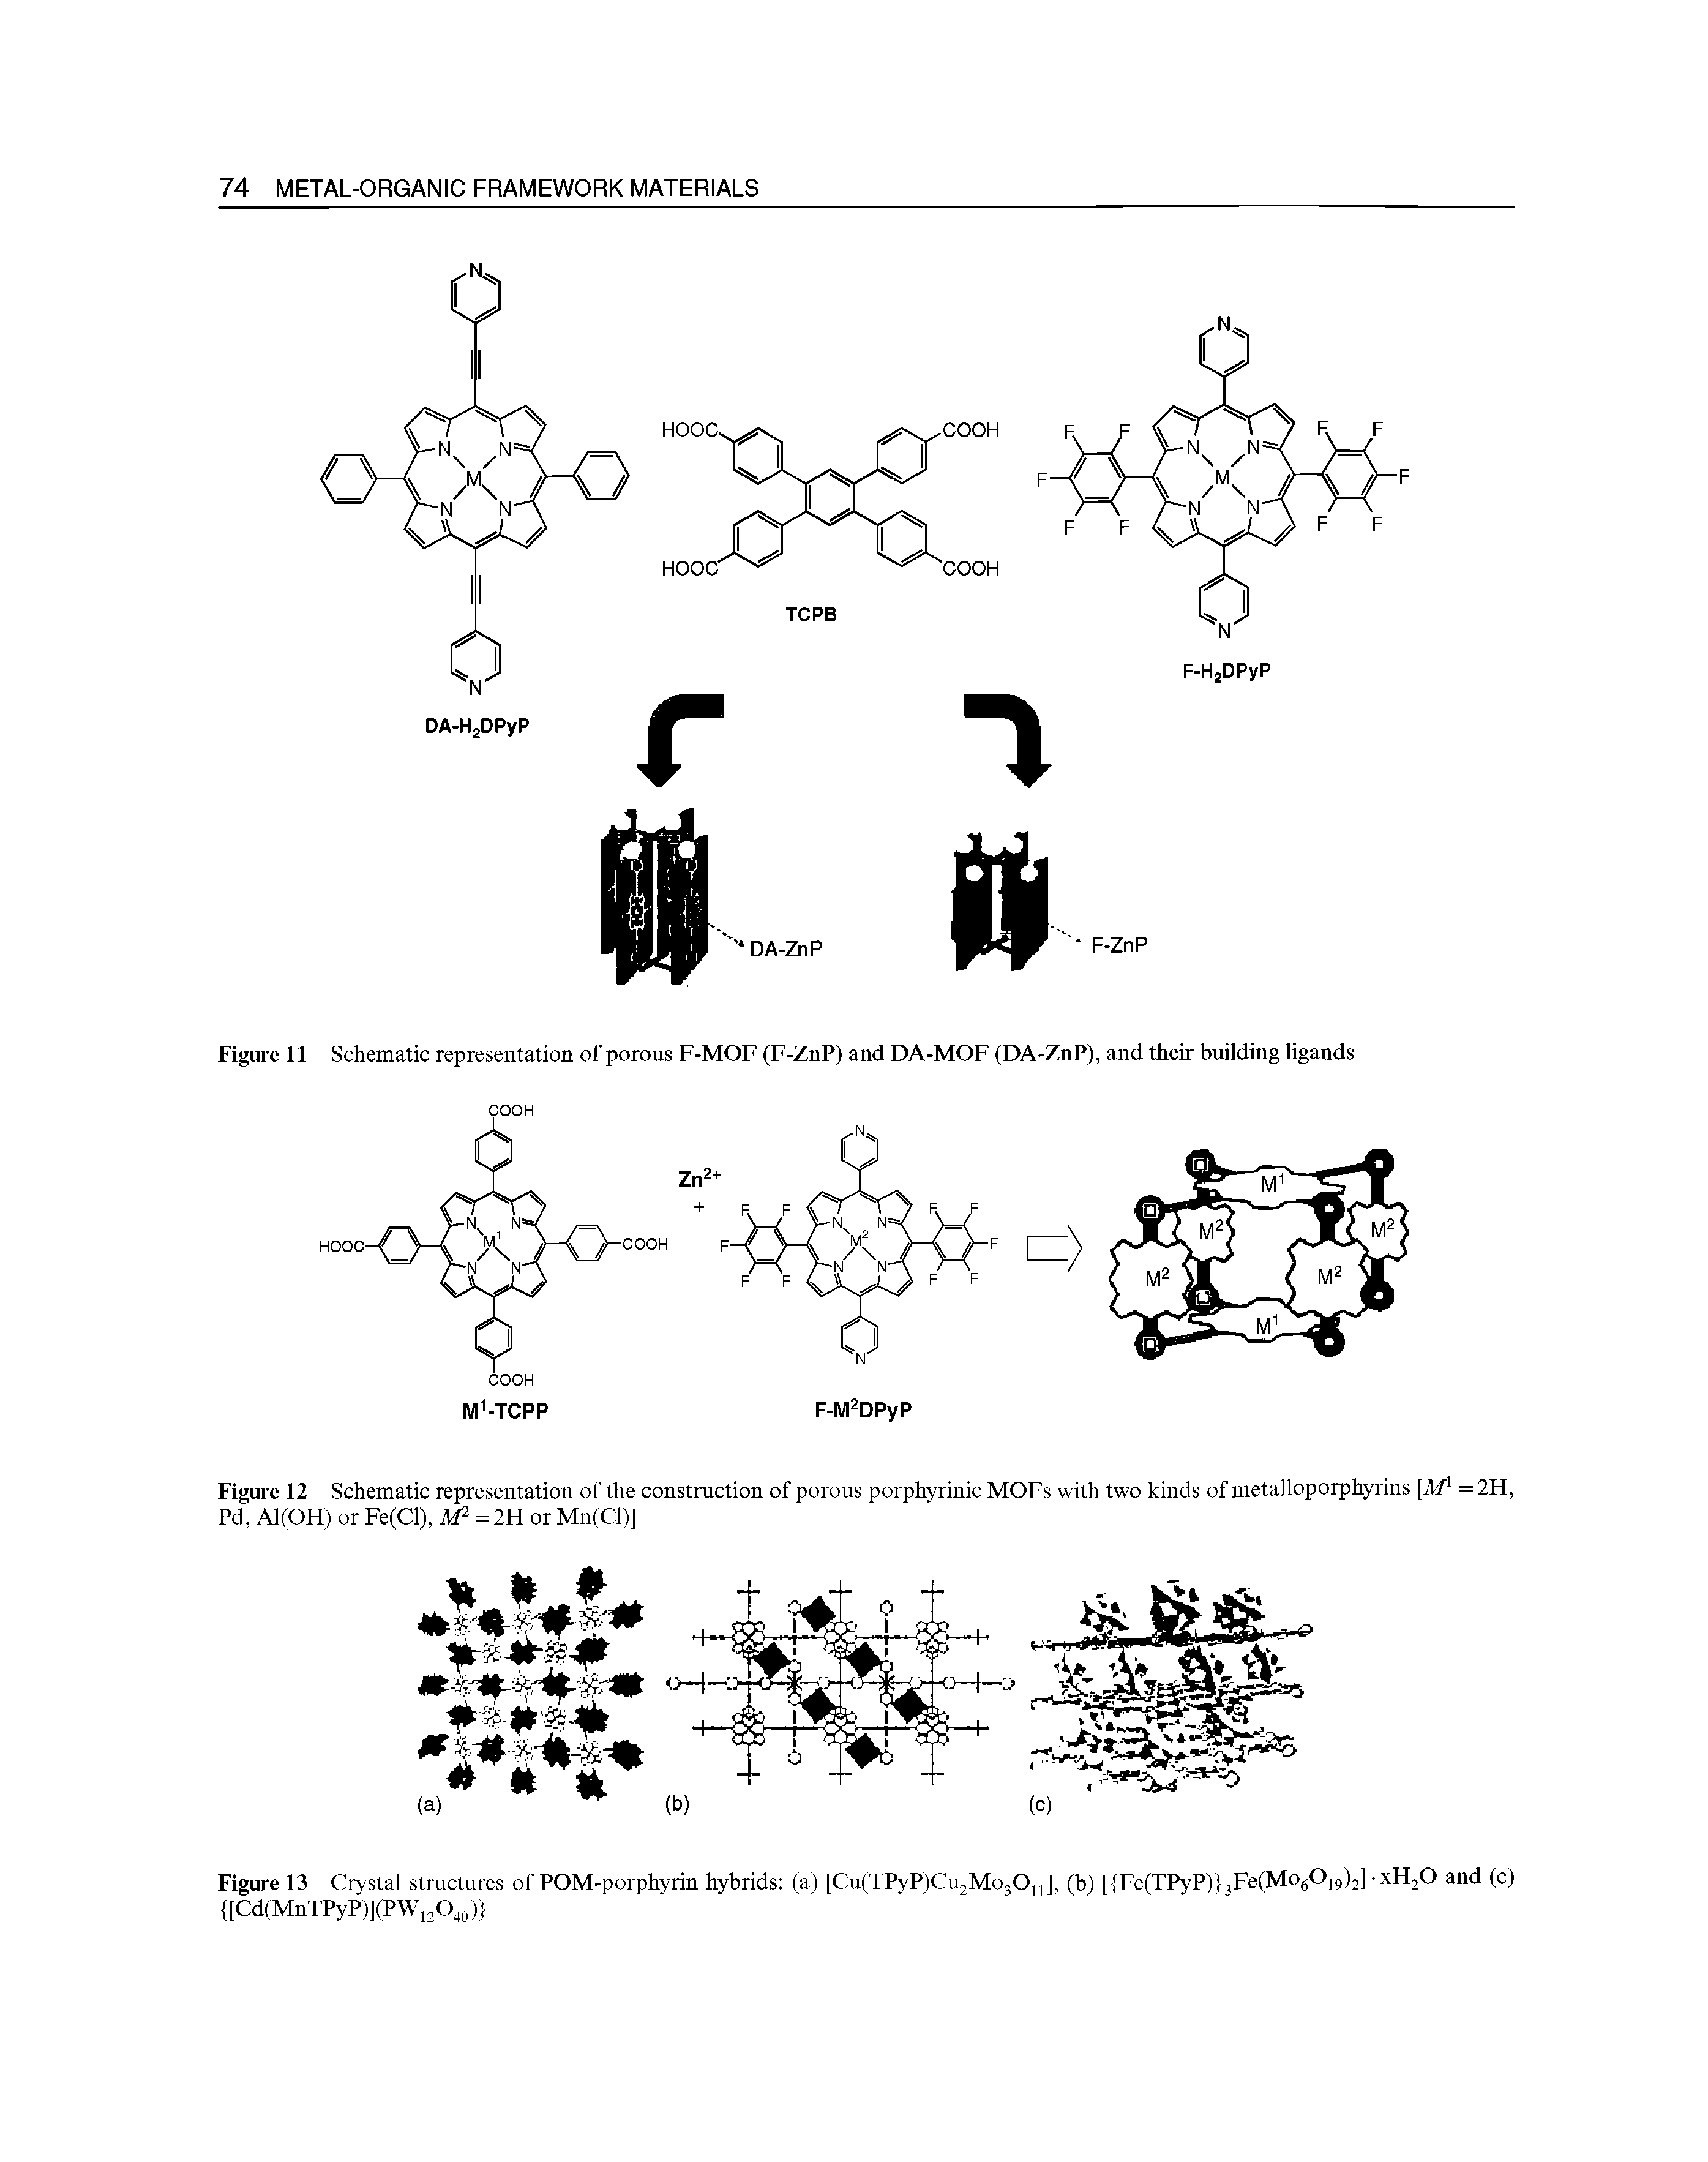 Figure 12 Schematic representation of the construction of porous porphyrinic MOFs with two kinds of metalloporphyrins [M =2H, Pd, Al(OH) or Fe(Cl), = 2H or Mn(Cl)]...